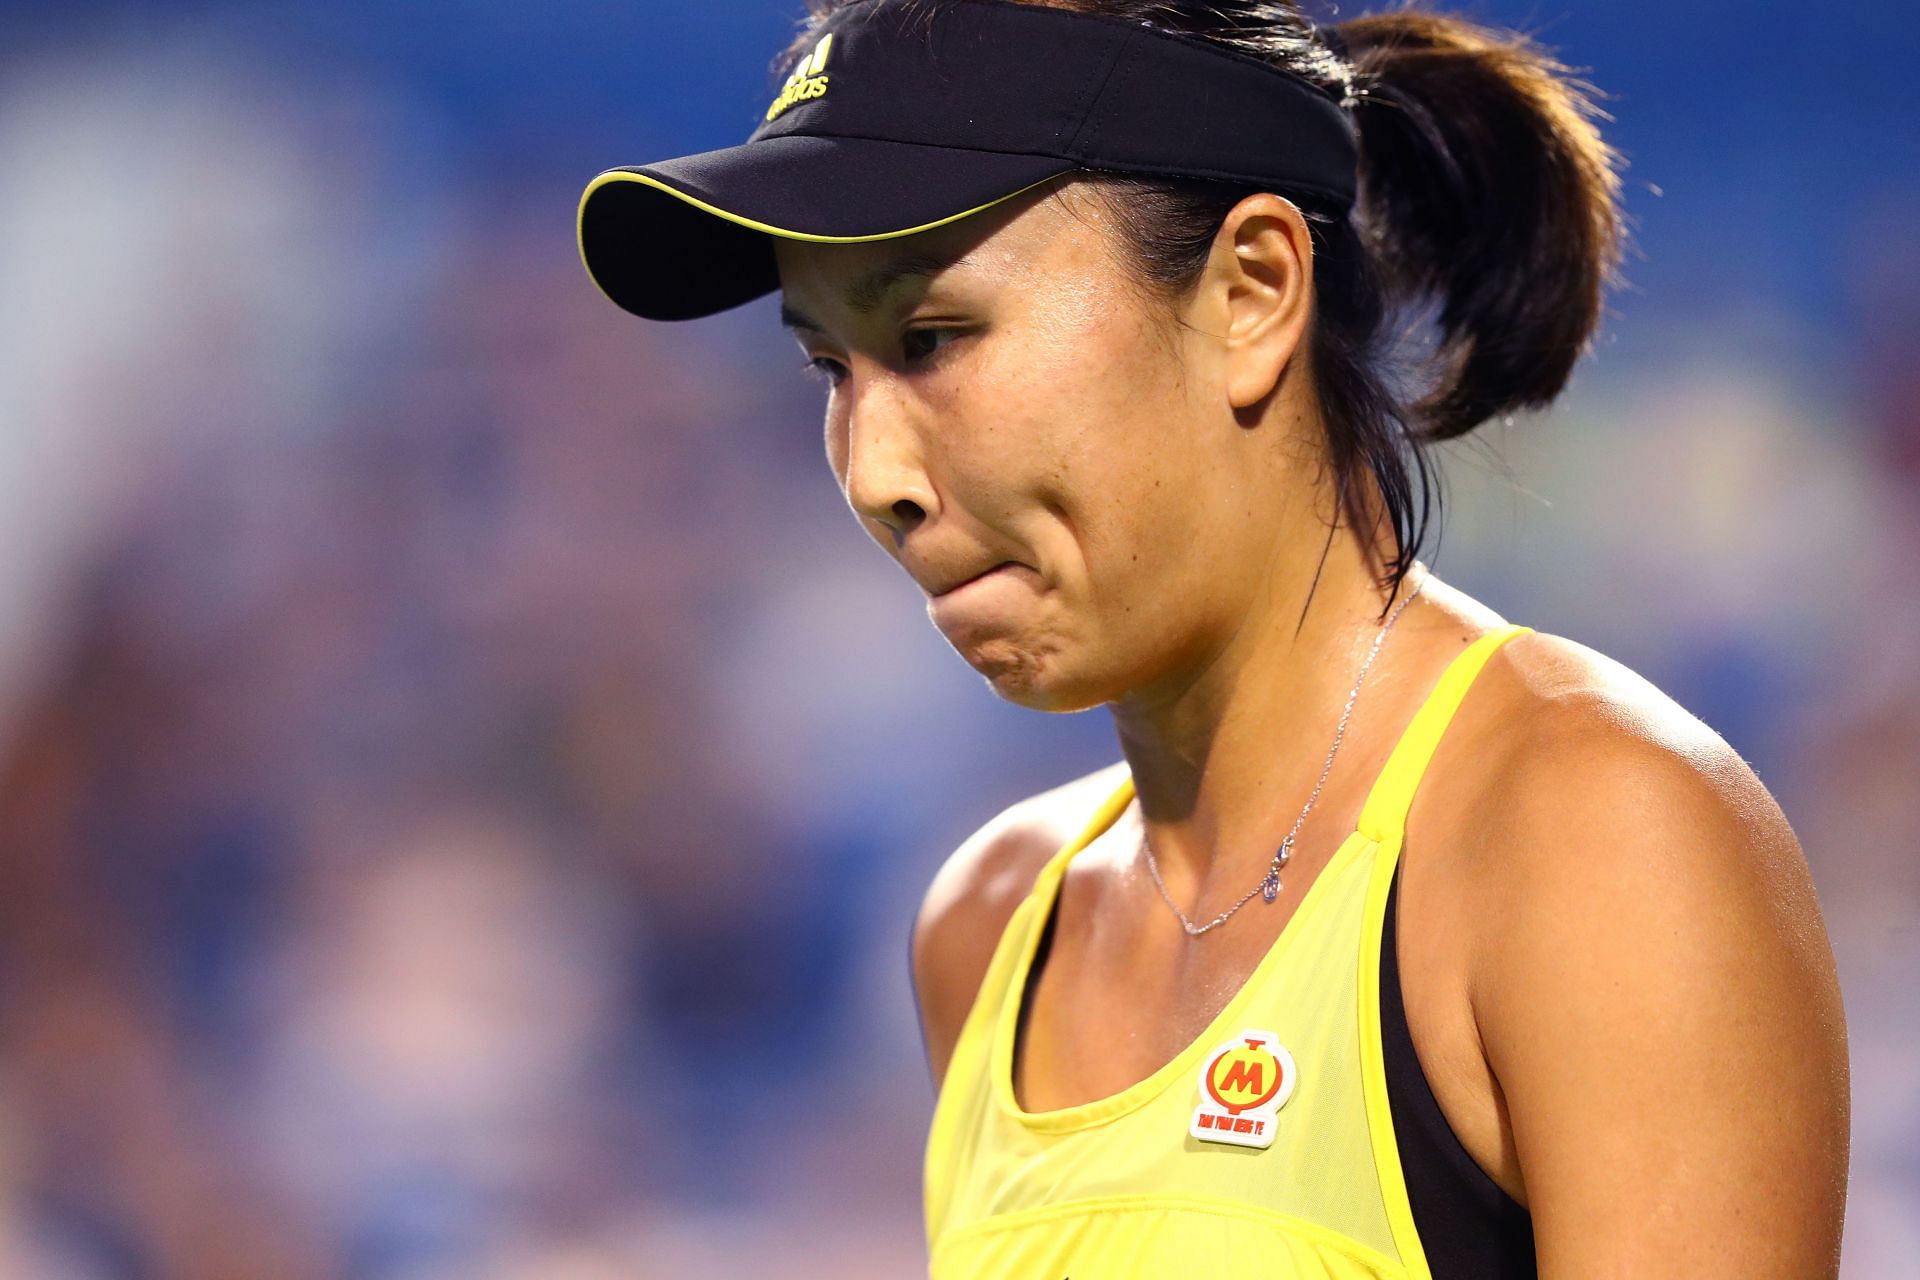 Peng Shuai has not been heard from since making charges against a senior Chinese politician.